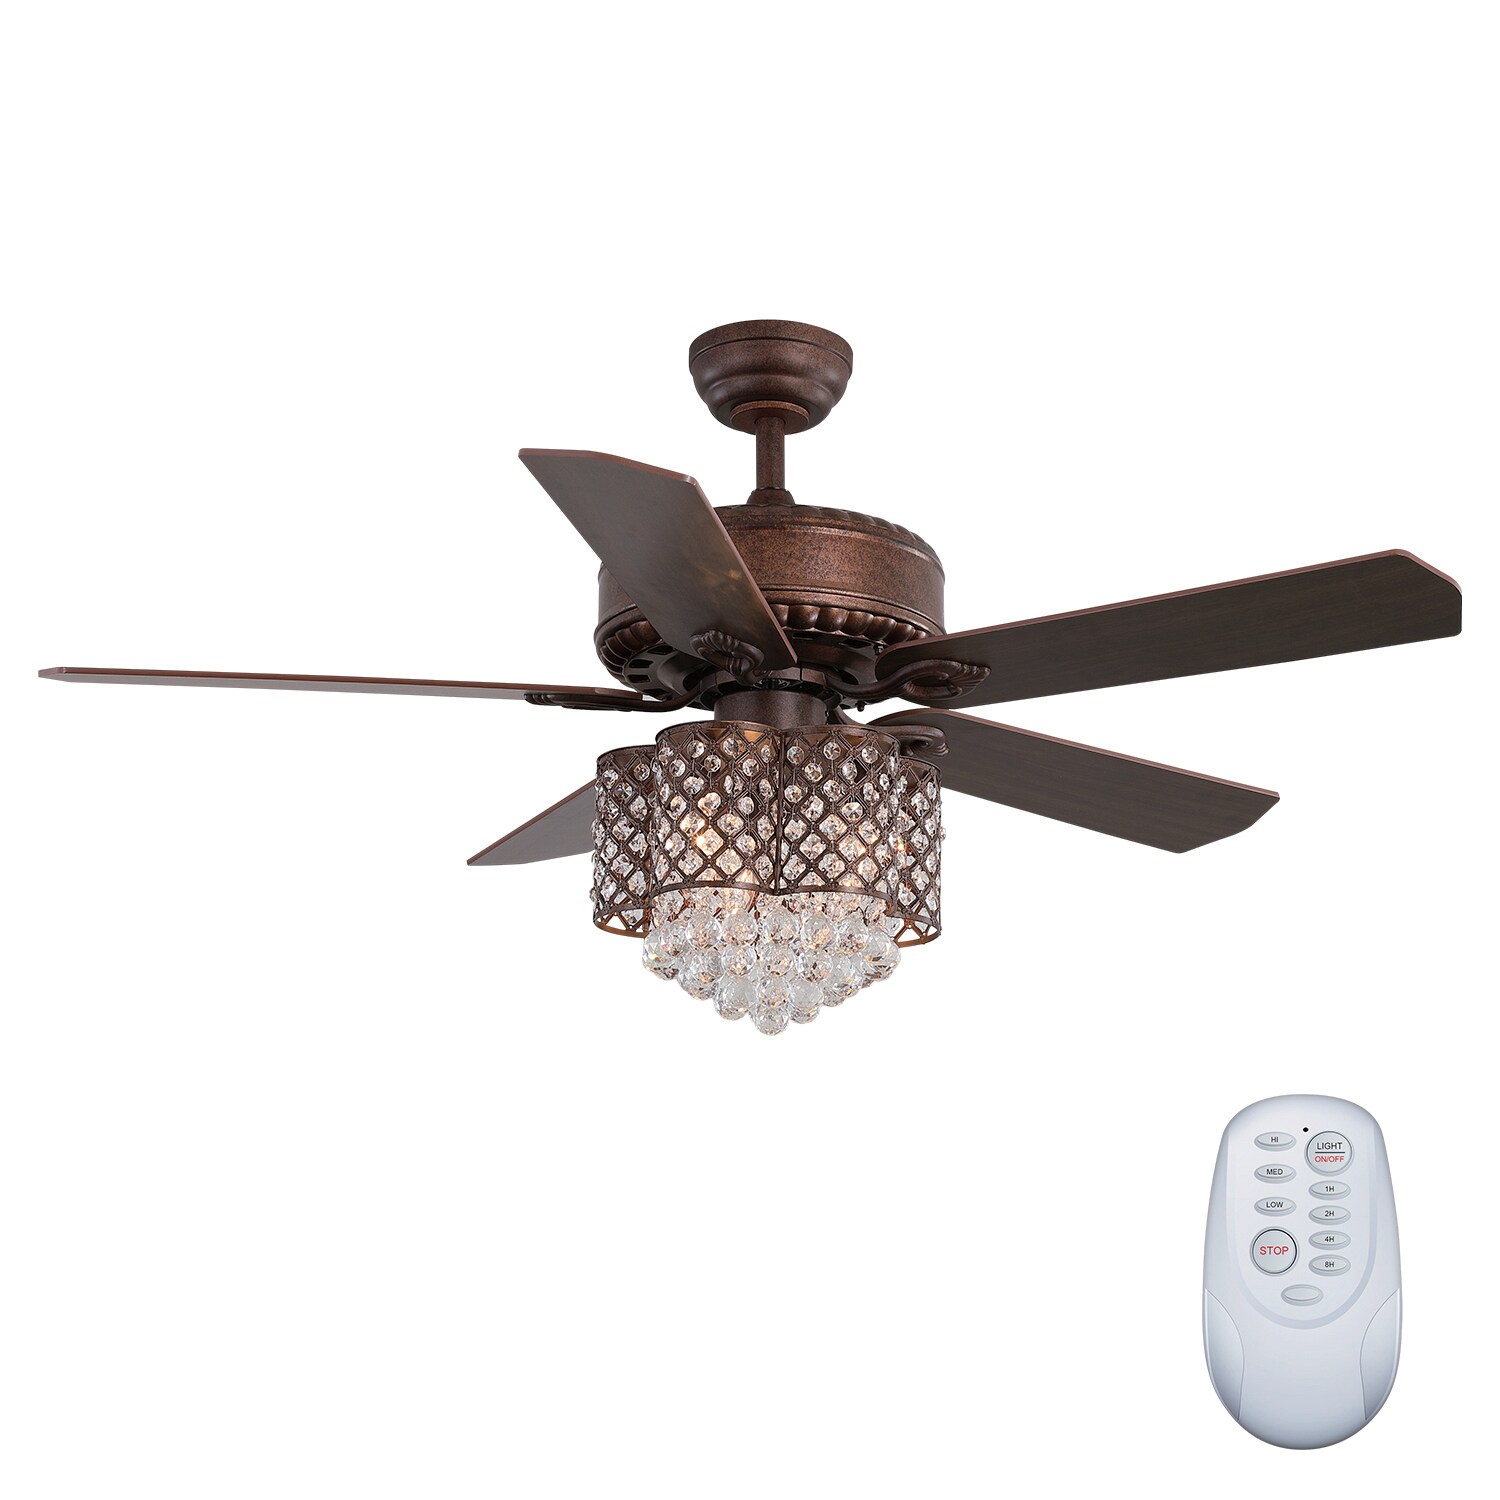 Chandelier 52 Inch Modern Indoor Rustic Ceiling Fan with Light Remote Control 